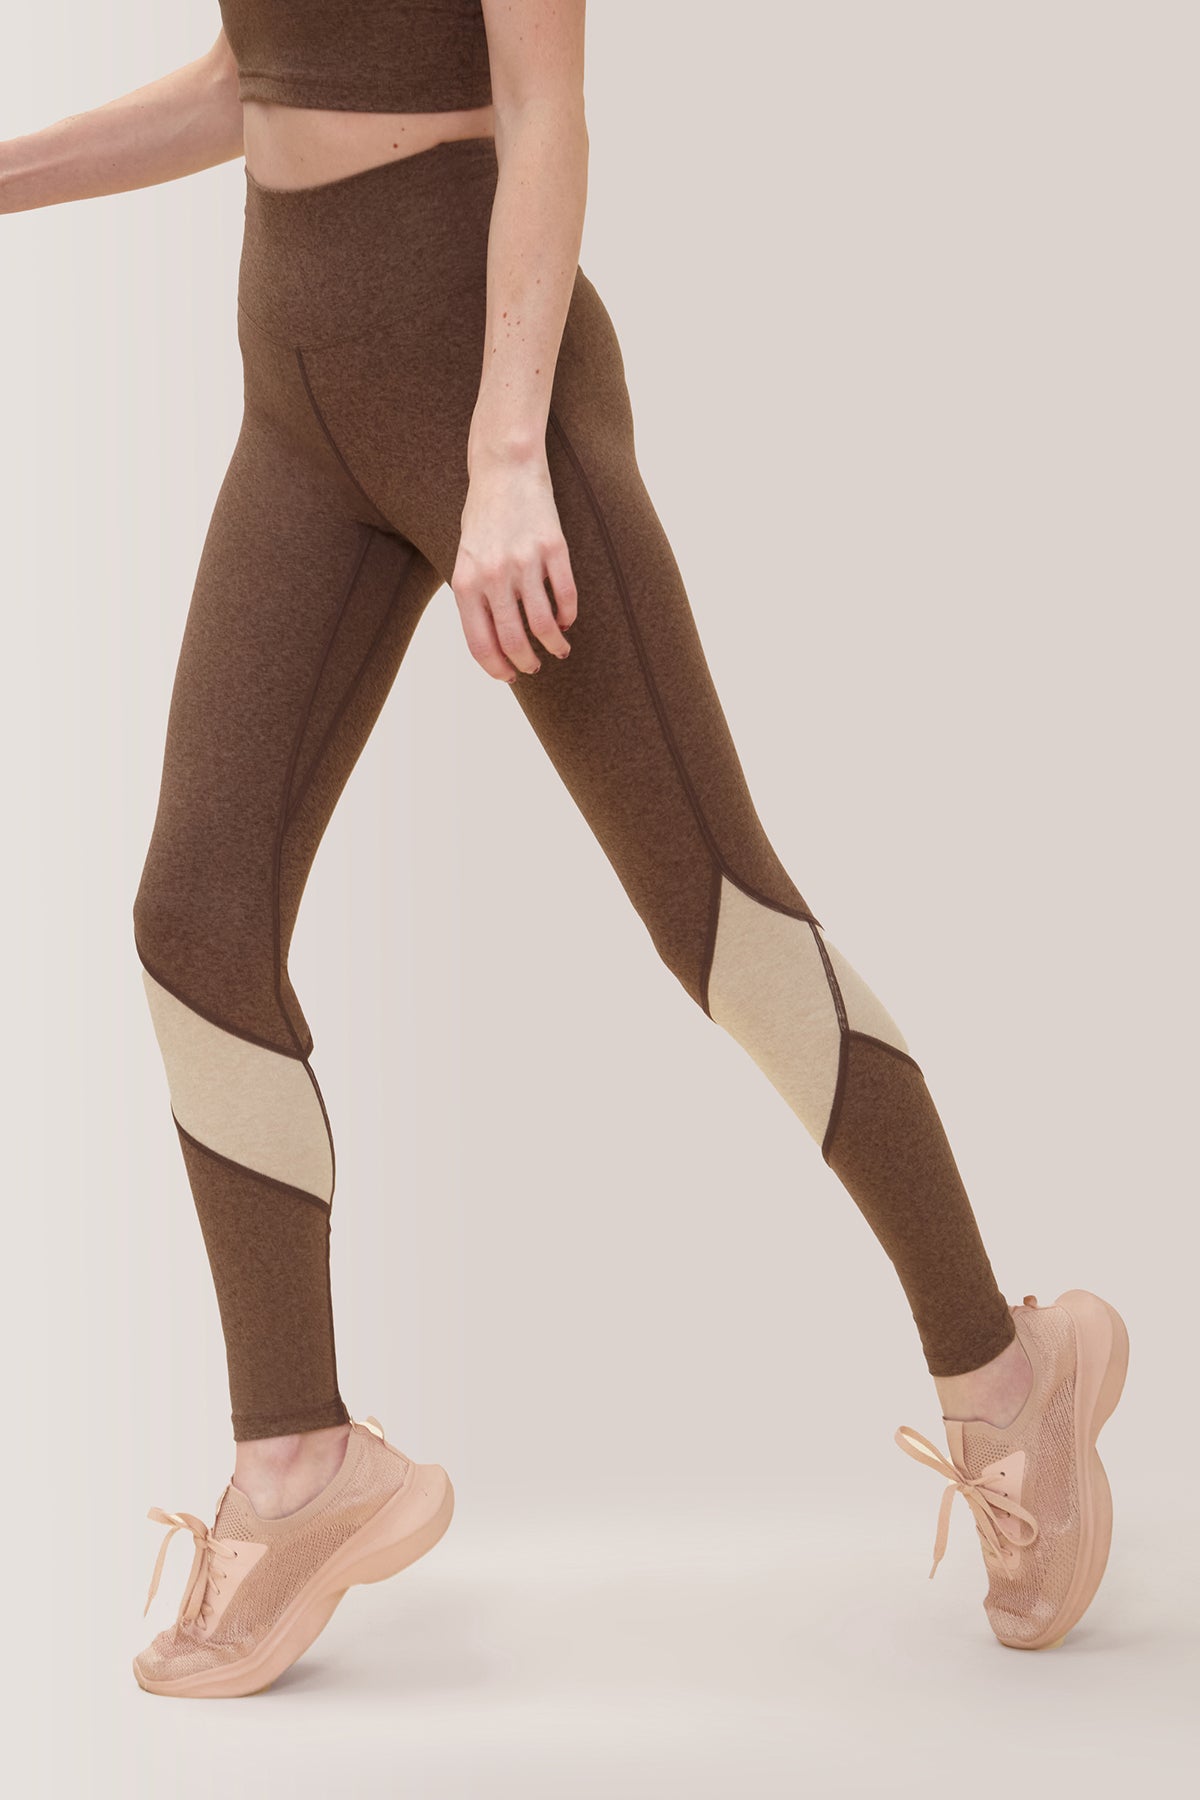 Femme qui porte les leggings Buttery Soft BFF High-Rise Keep Moving de Rose Boreal./ Women wearing the buttery soft BFF high-rise Keep Moving leggings from Rose Boreal. -Truffle